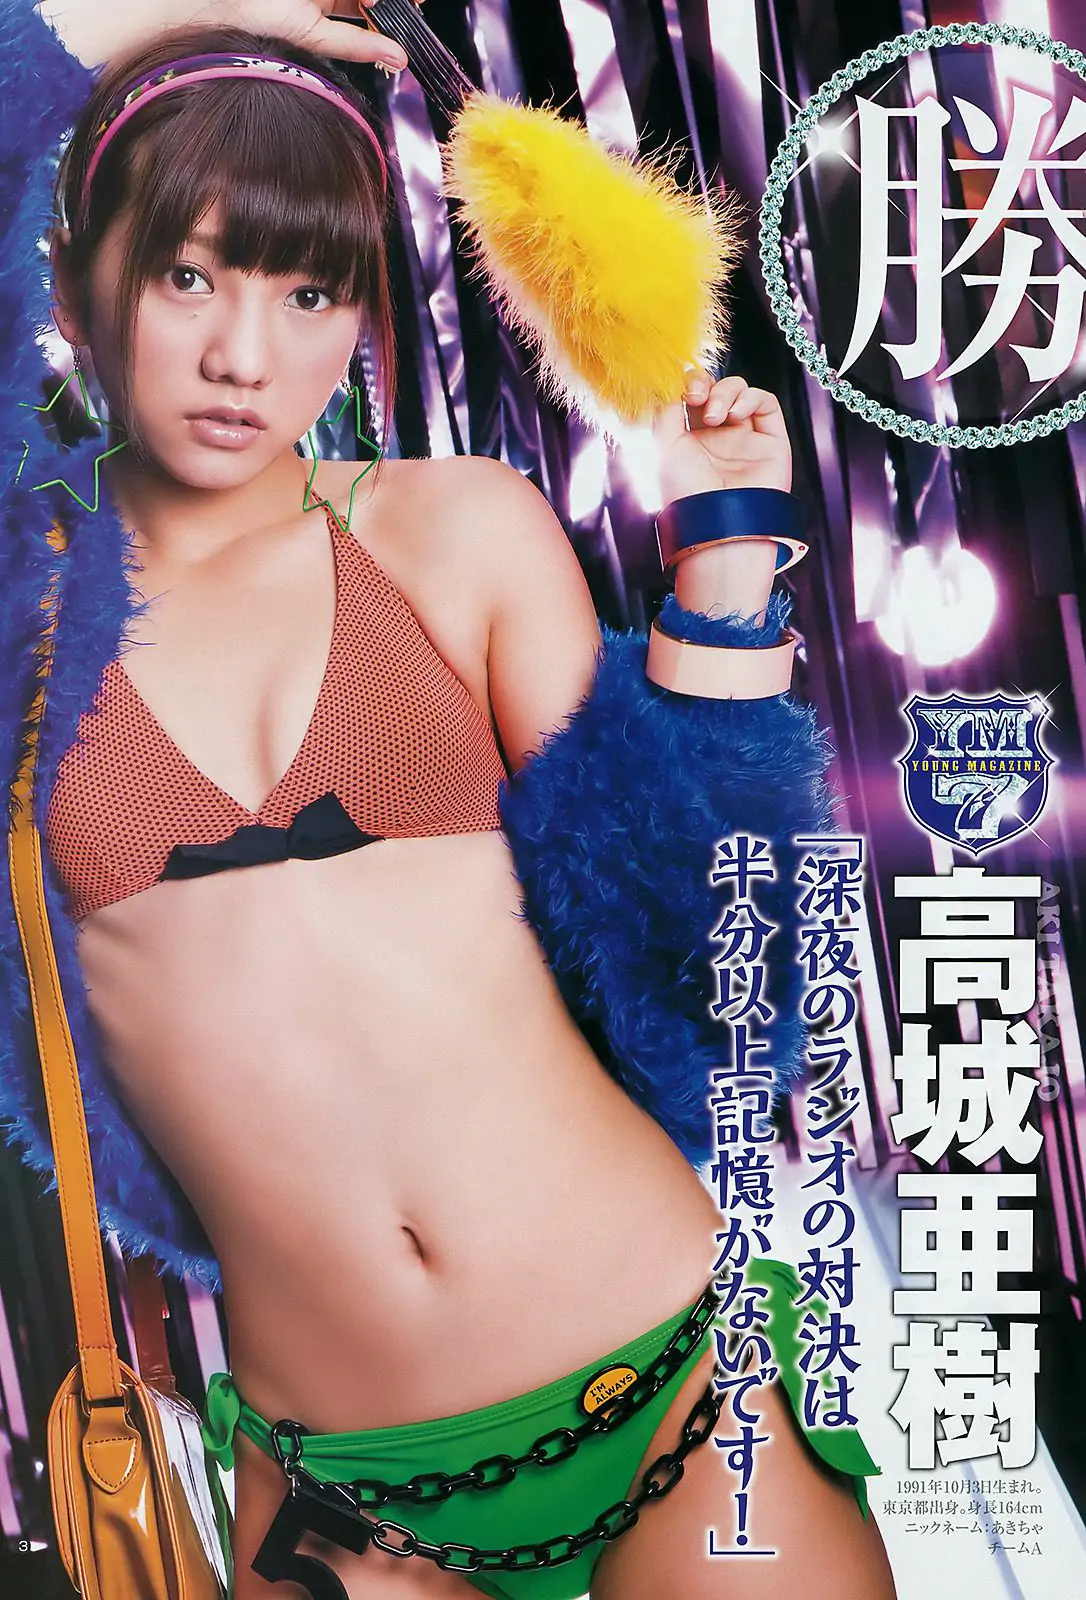 AKB48 YJ7 vs. YM7 神保町?護国寺大戦 FINAL PARTY [Weekly Young Jump] 2012年No.01 写真杂志